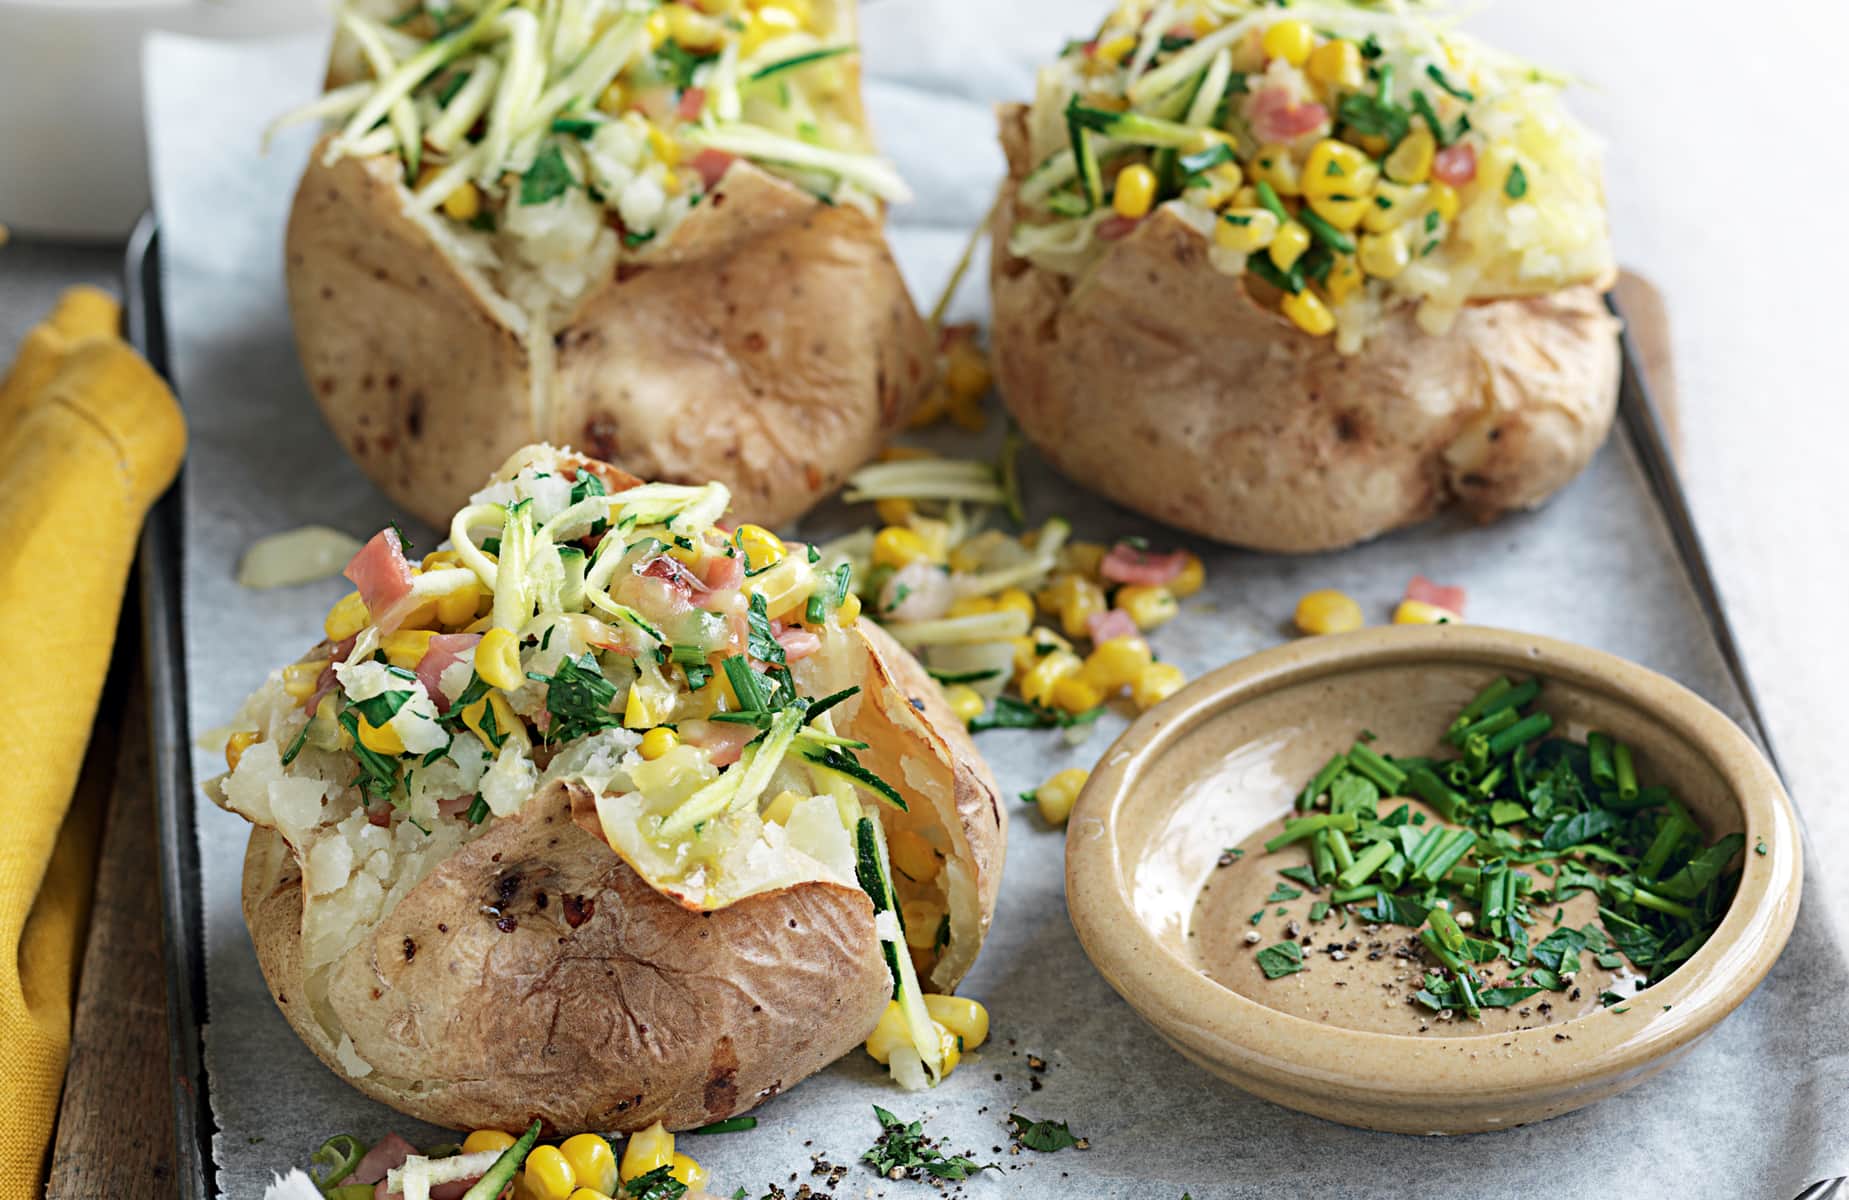 Jacket potato with bacon, corn, chives and cheddar - Healthy Food Guide